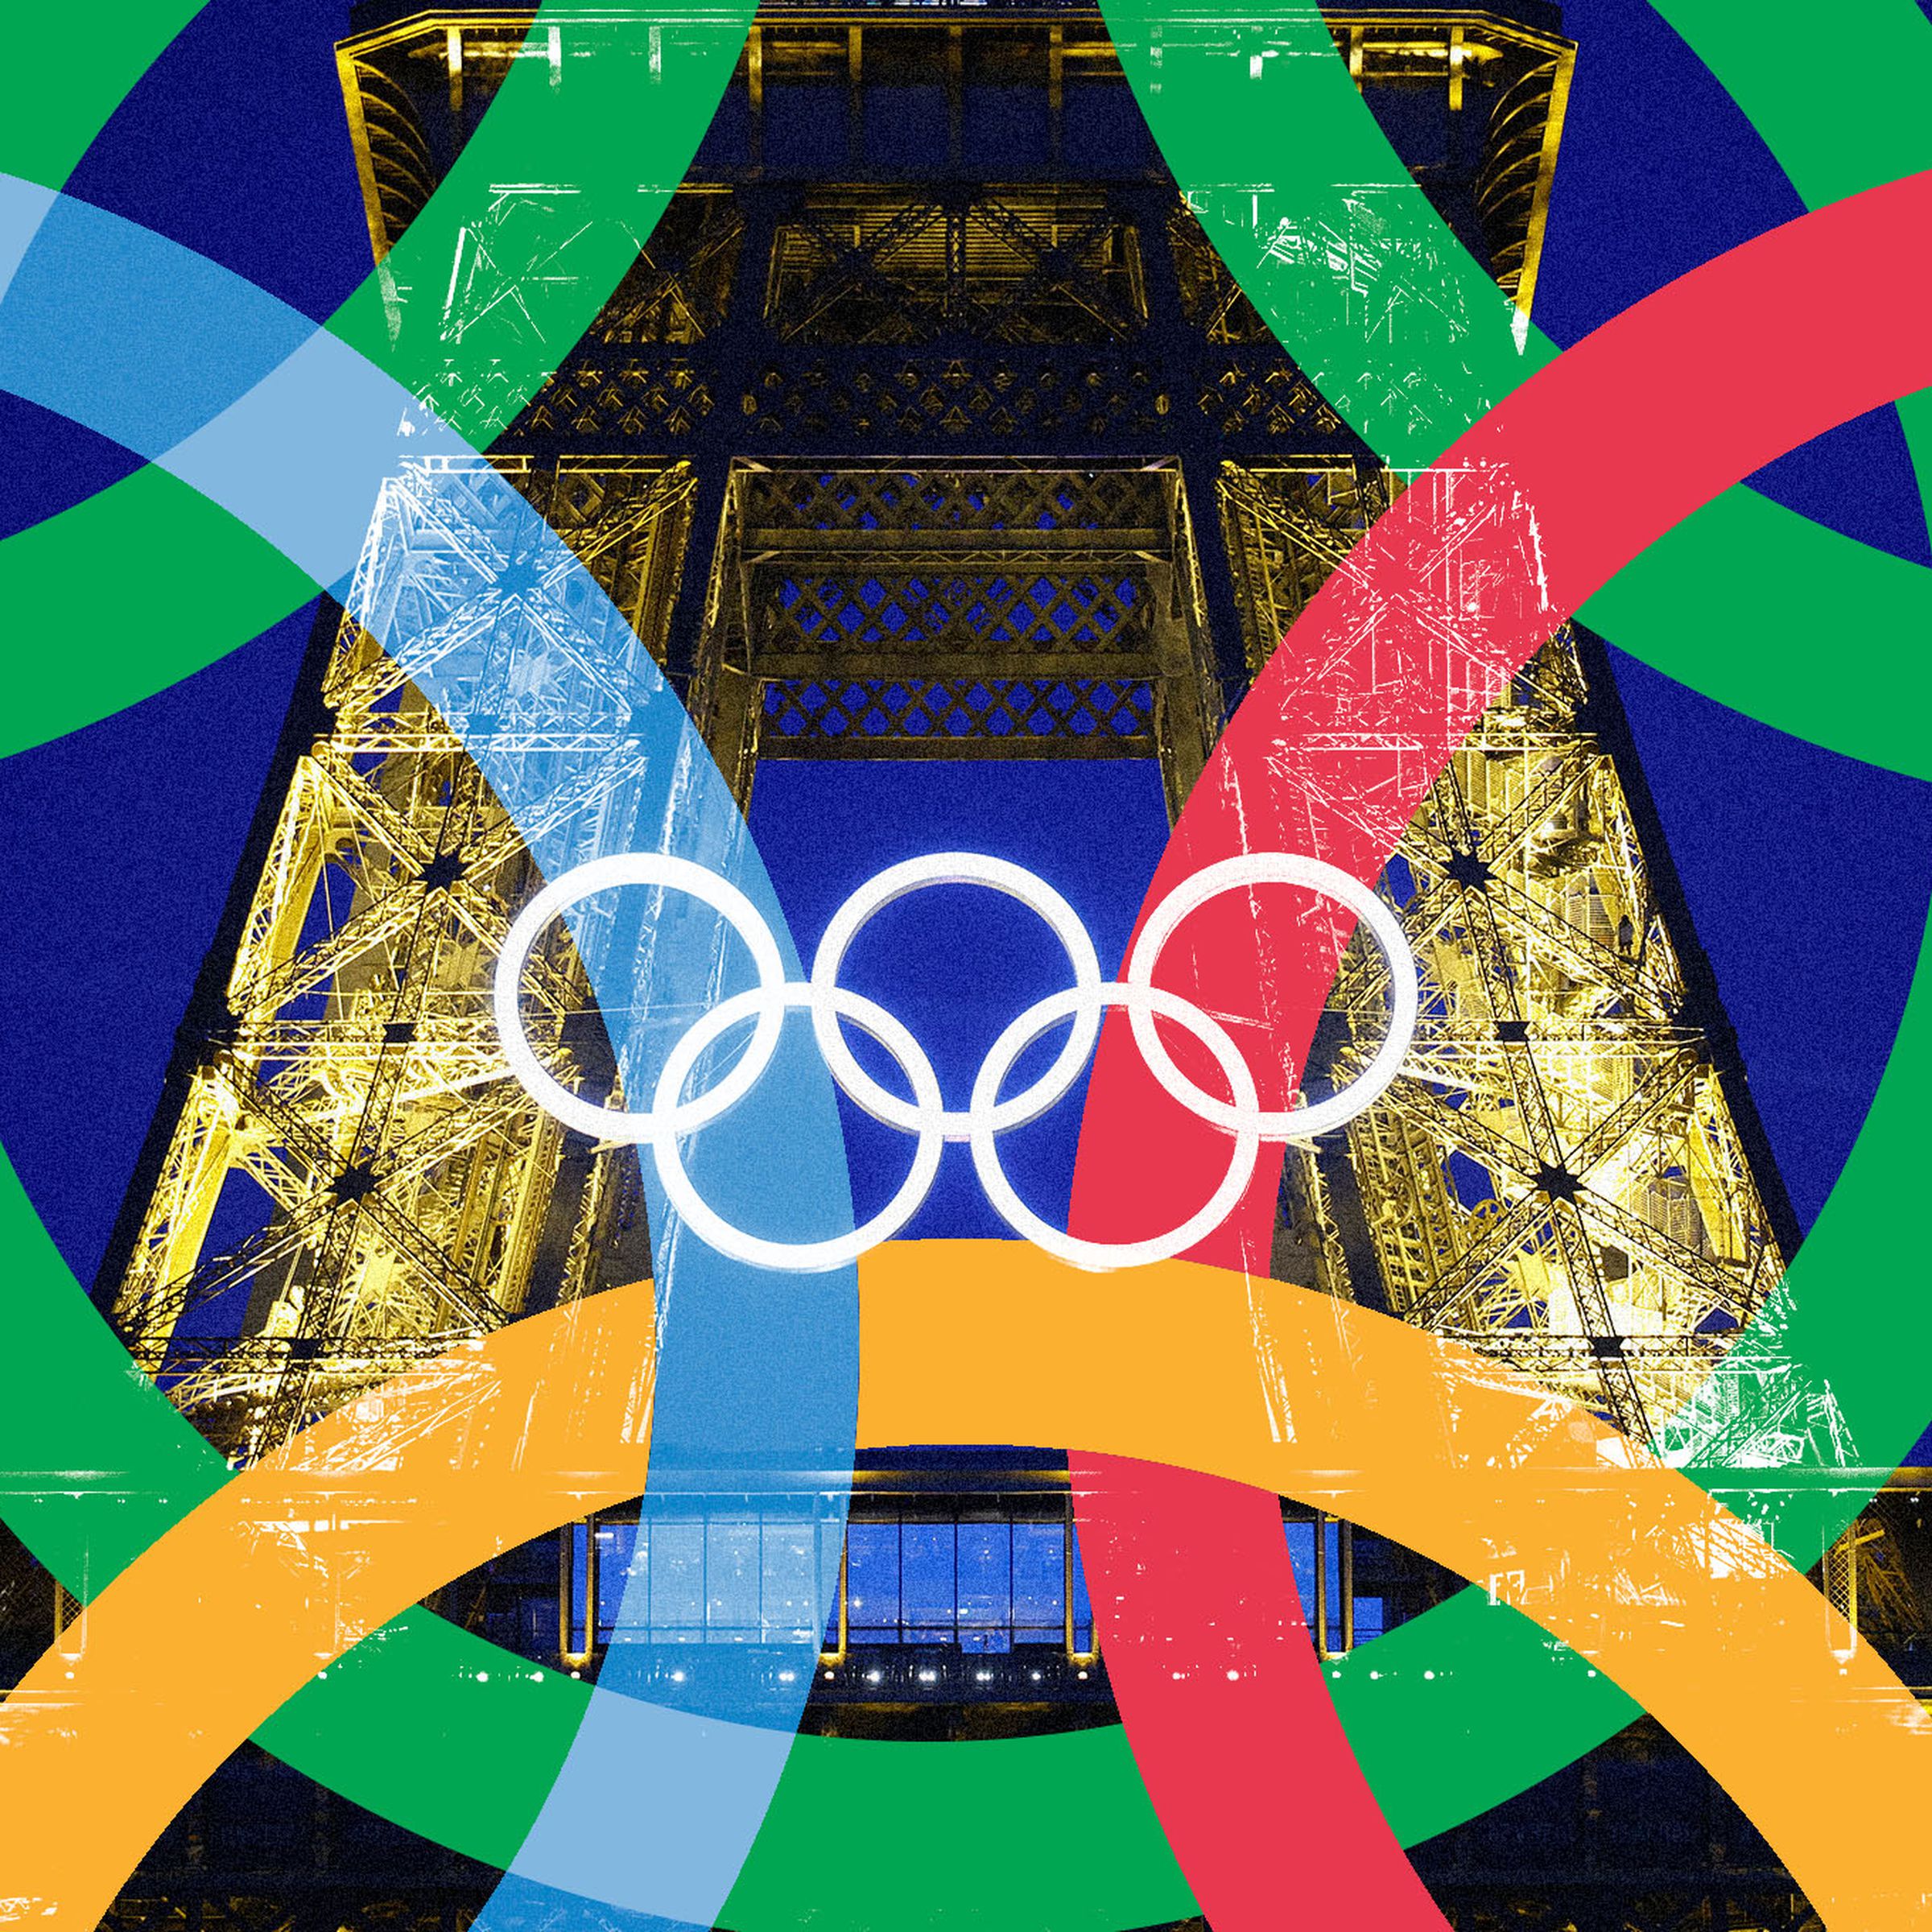 Photo collage of the Olympic rings over a photo of the Olympic rings illuminated on the Eiffel Tower.